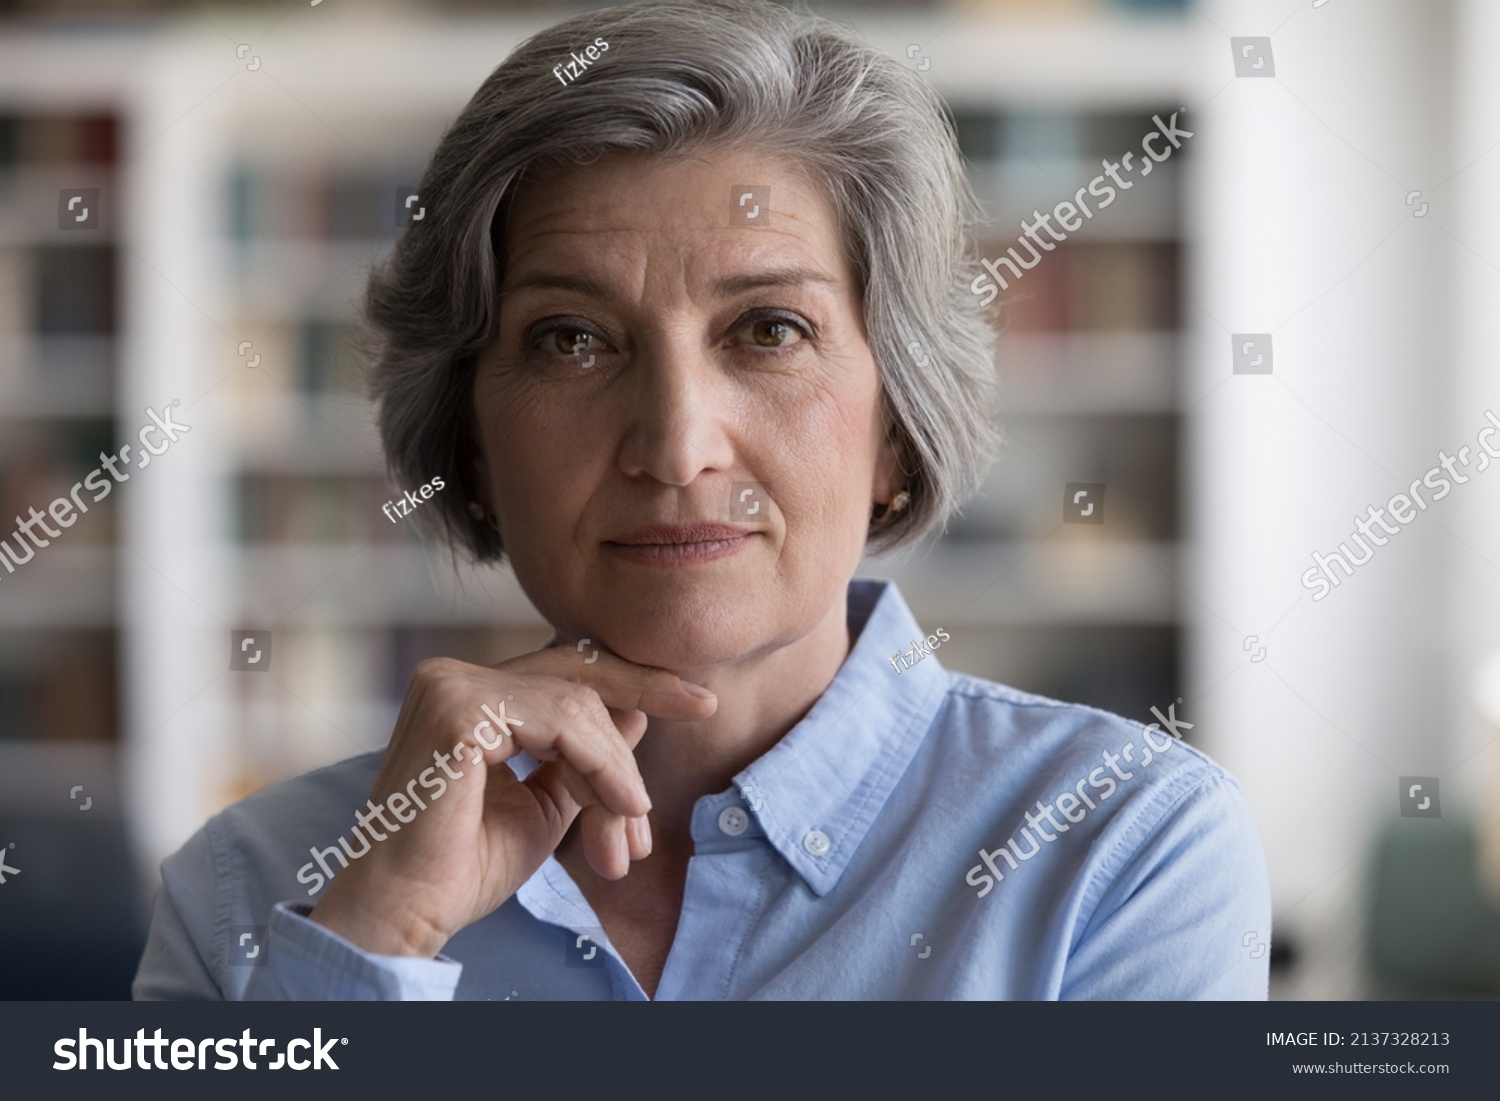 Close up head shot beautiful grey-haired woman touch chin with hand staring at camera, looks confident and serious, having elegant style, attractive appearance. Mature businesswoman portrait concept #2137328213